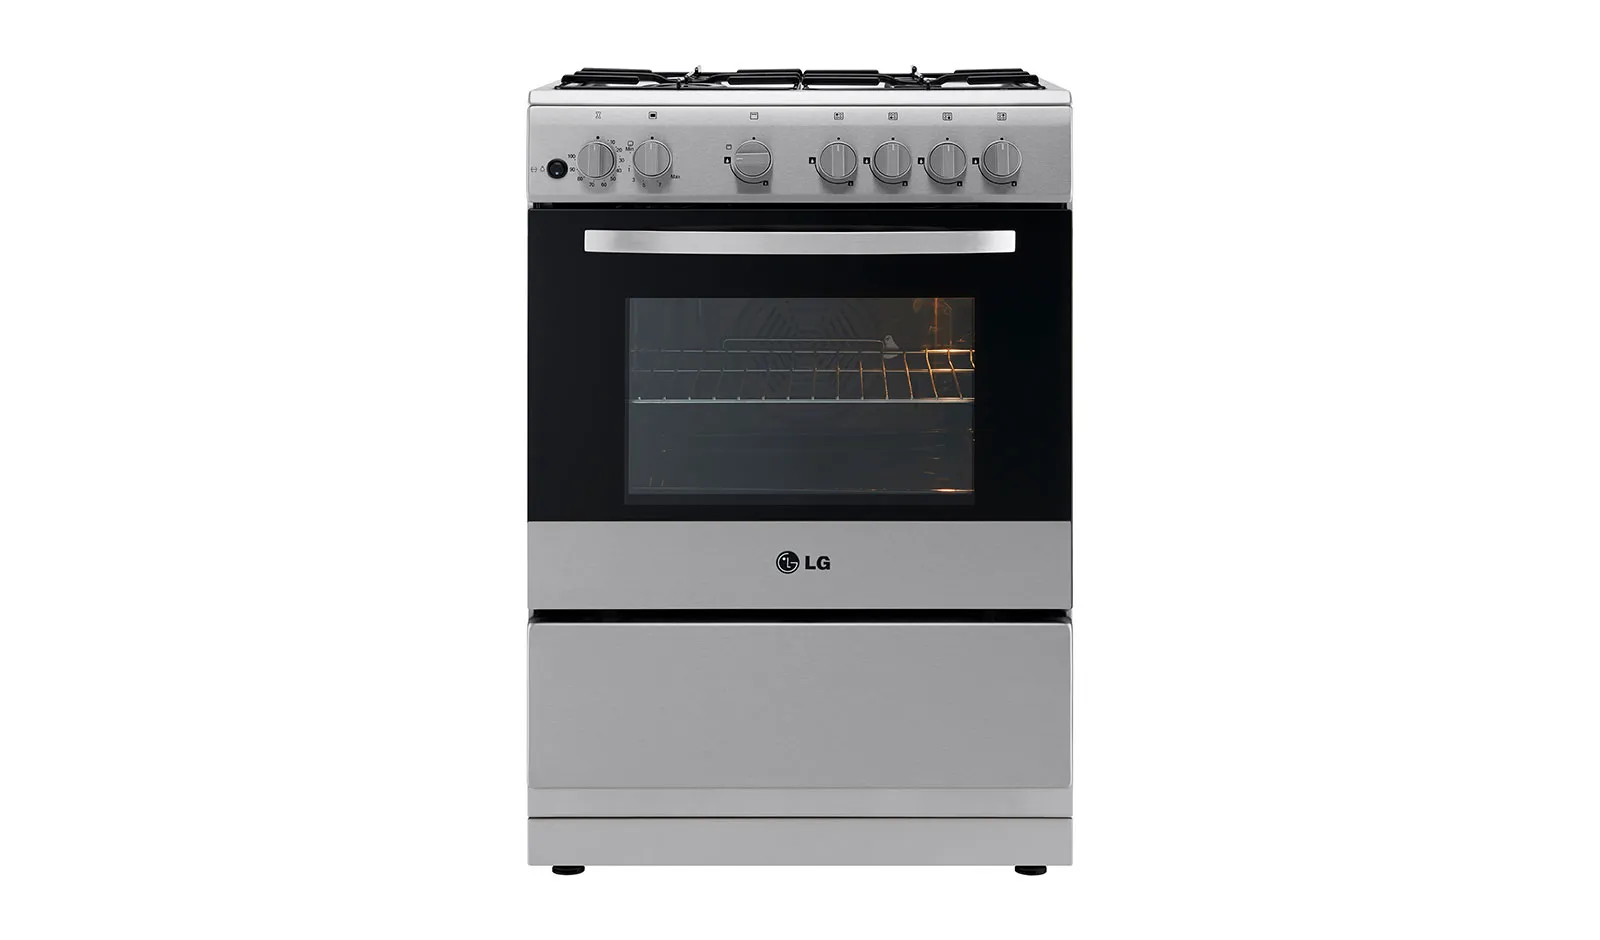 LF68V00S CUISINIERE LG 4 Feux GRIS LF68V00S - 0